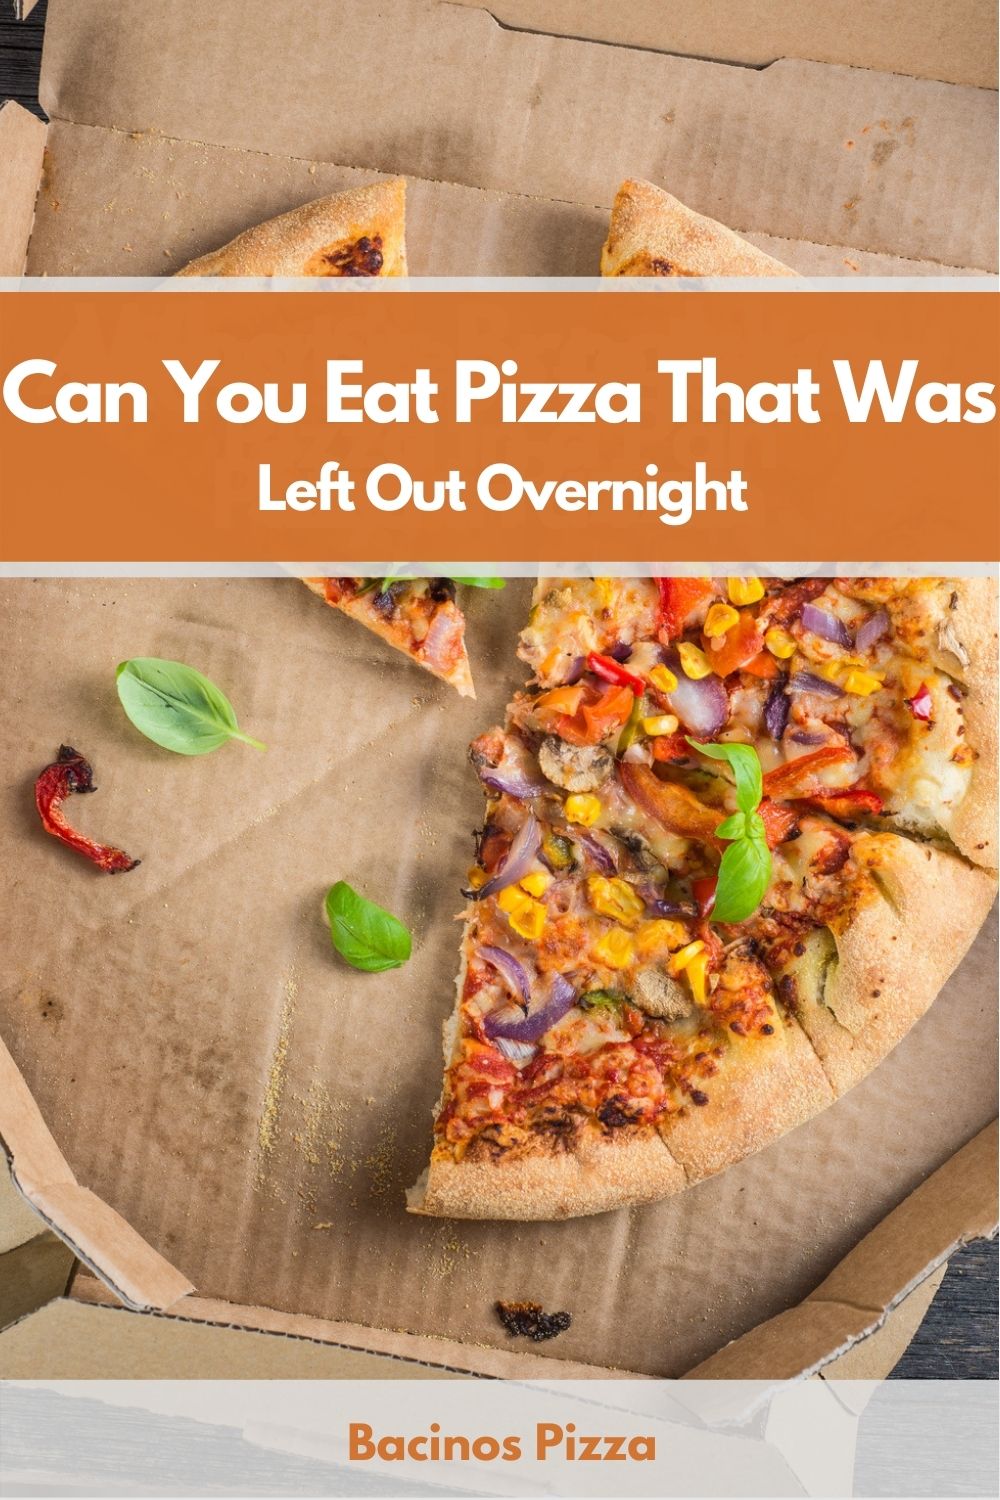 Can You Eat Pizza That Was Left Out Overnight?